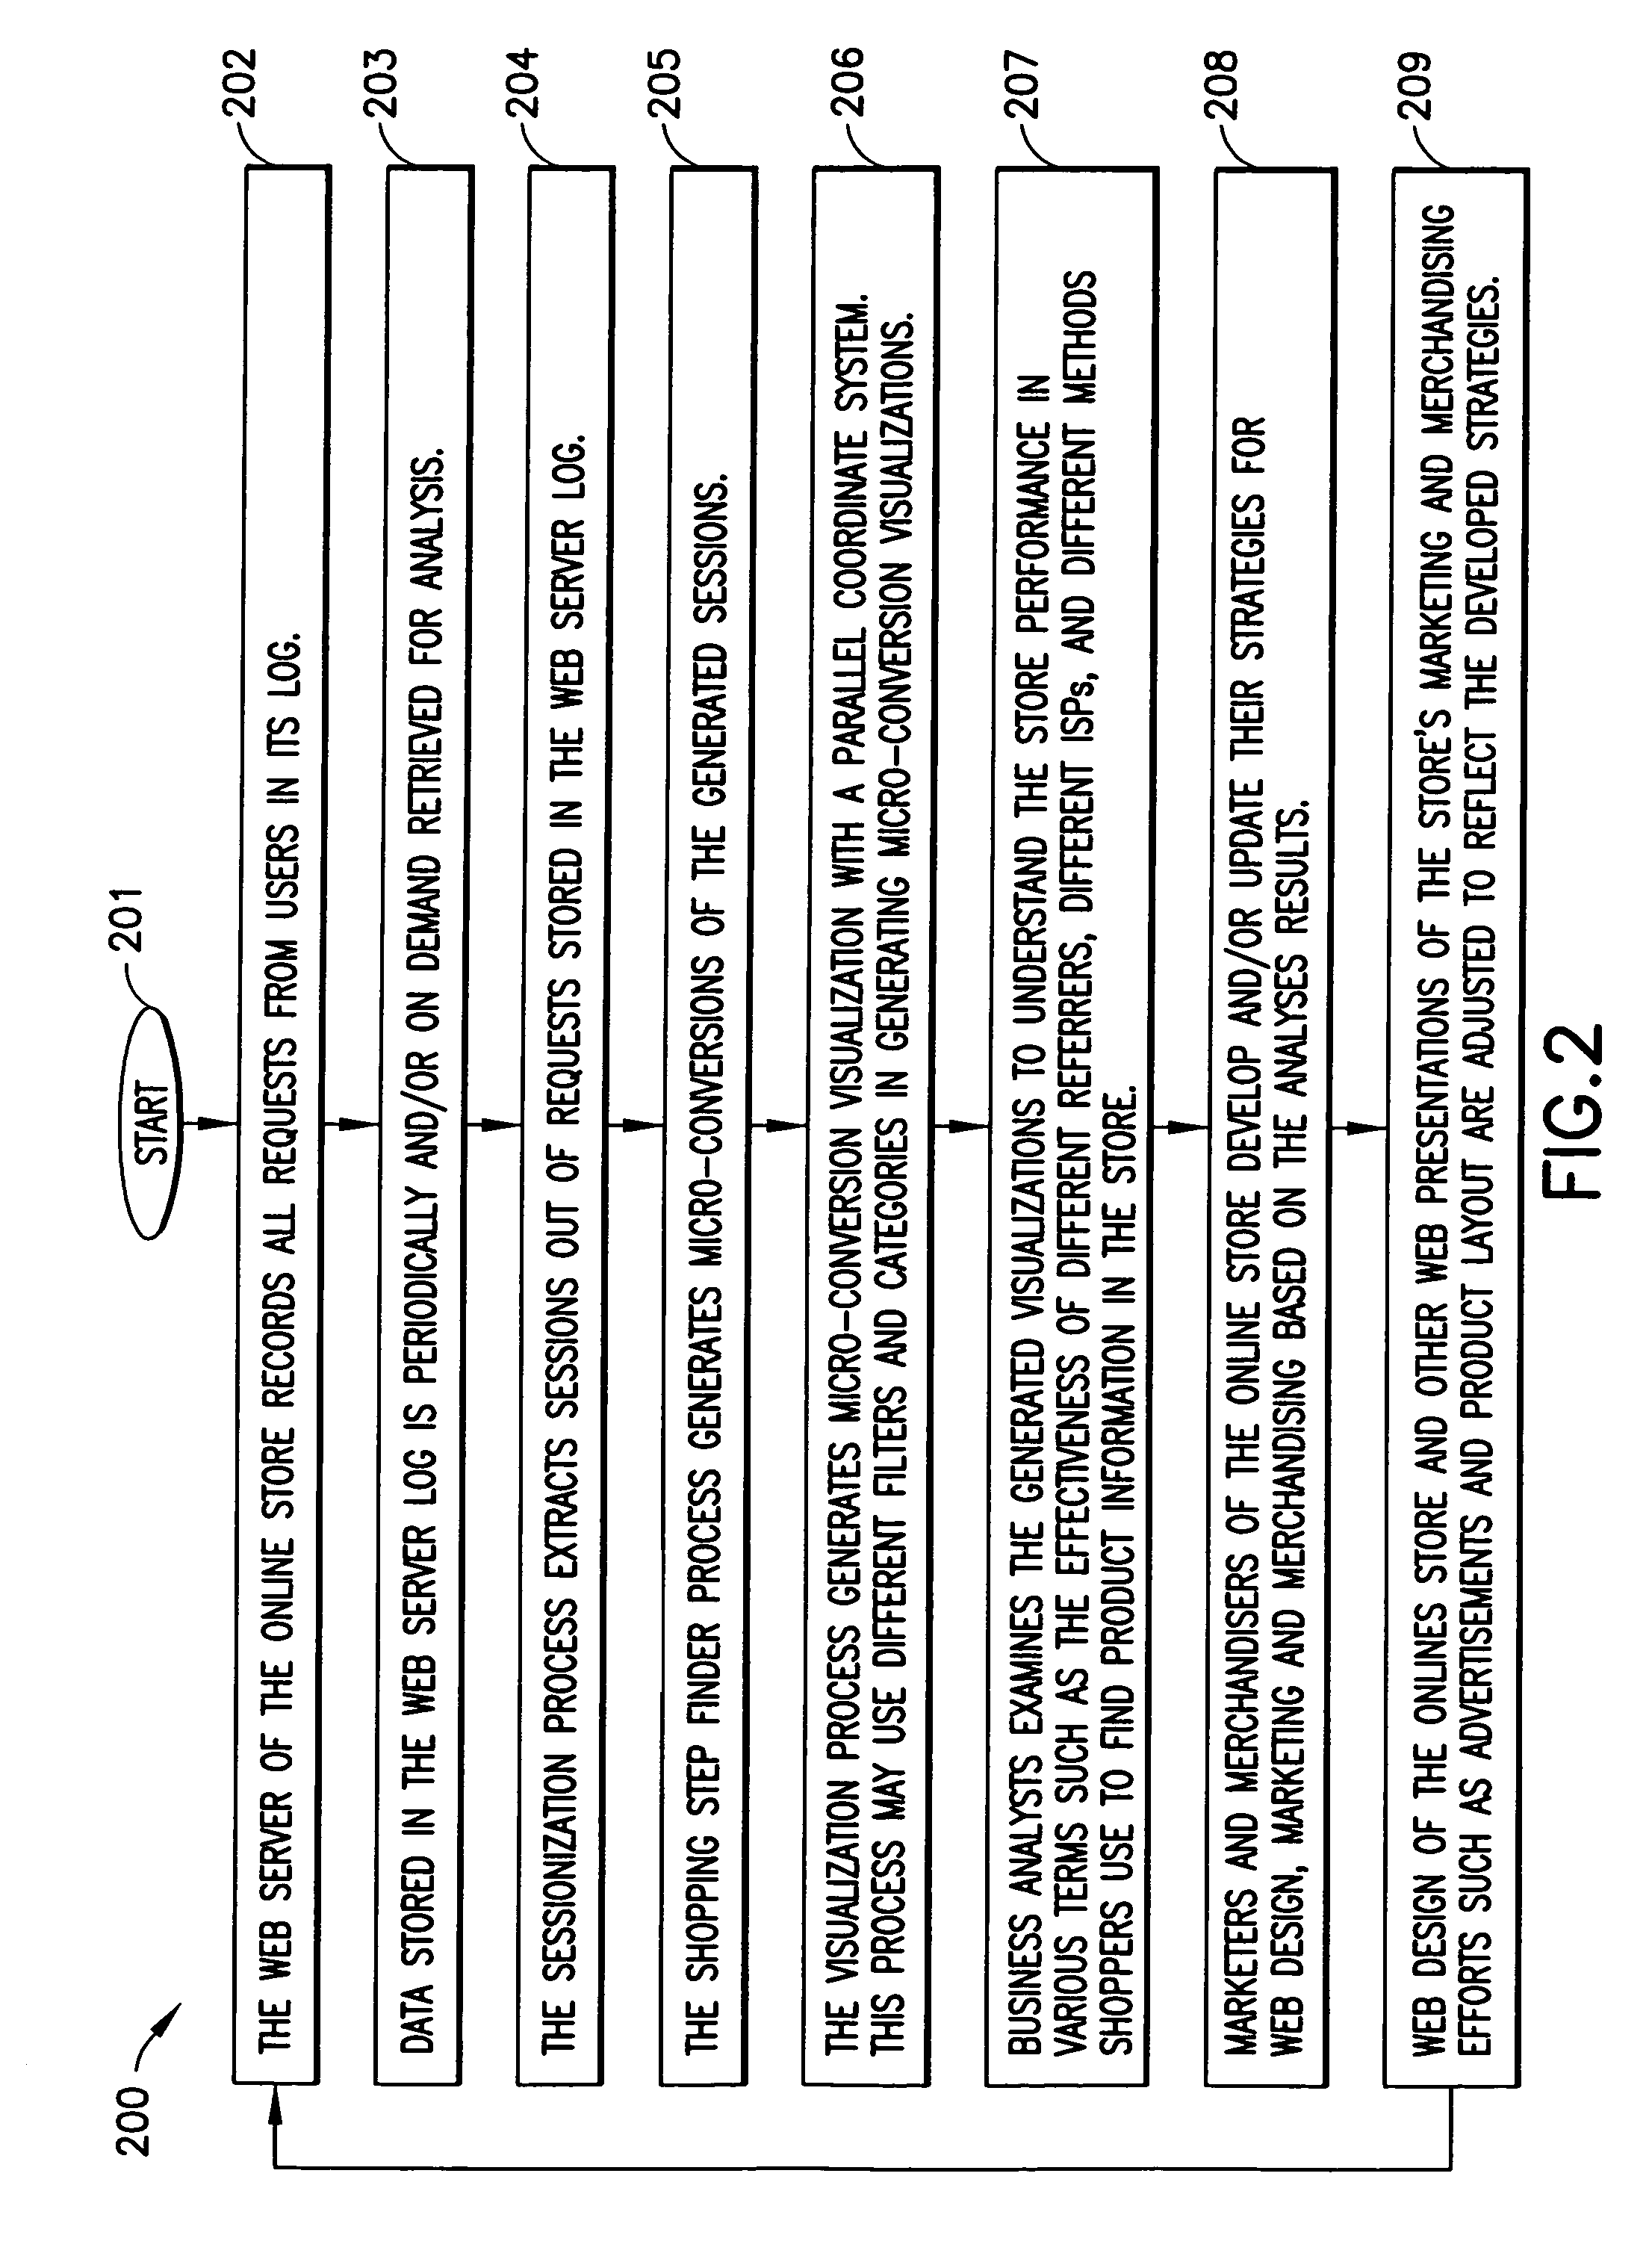 Method for graphically representing clickstream data of a shopping session on a network with a parallel coordinate system